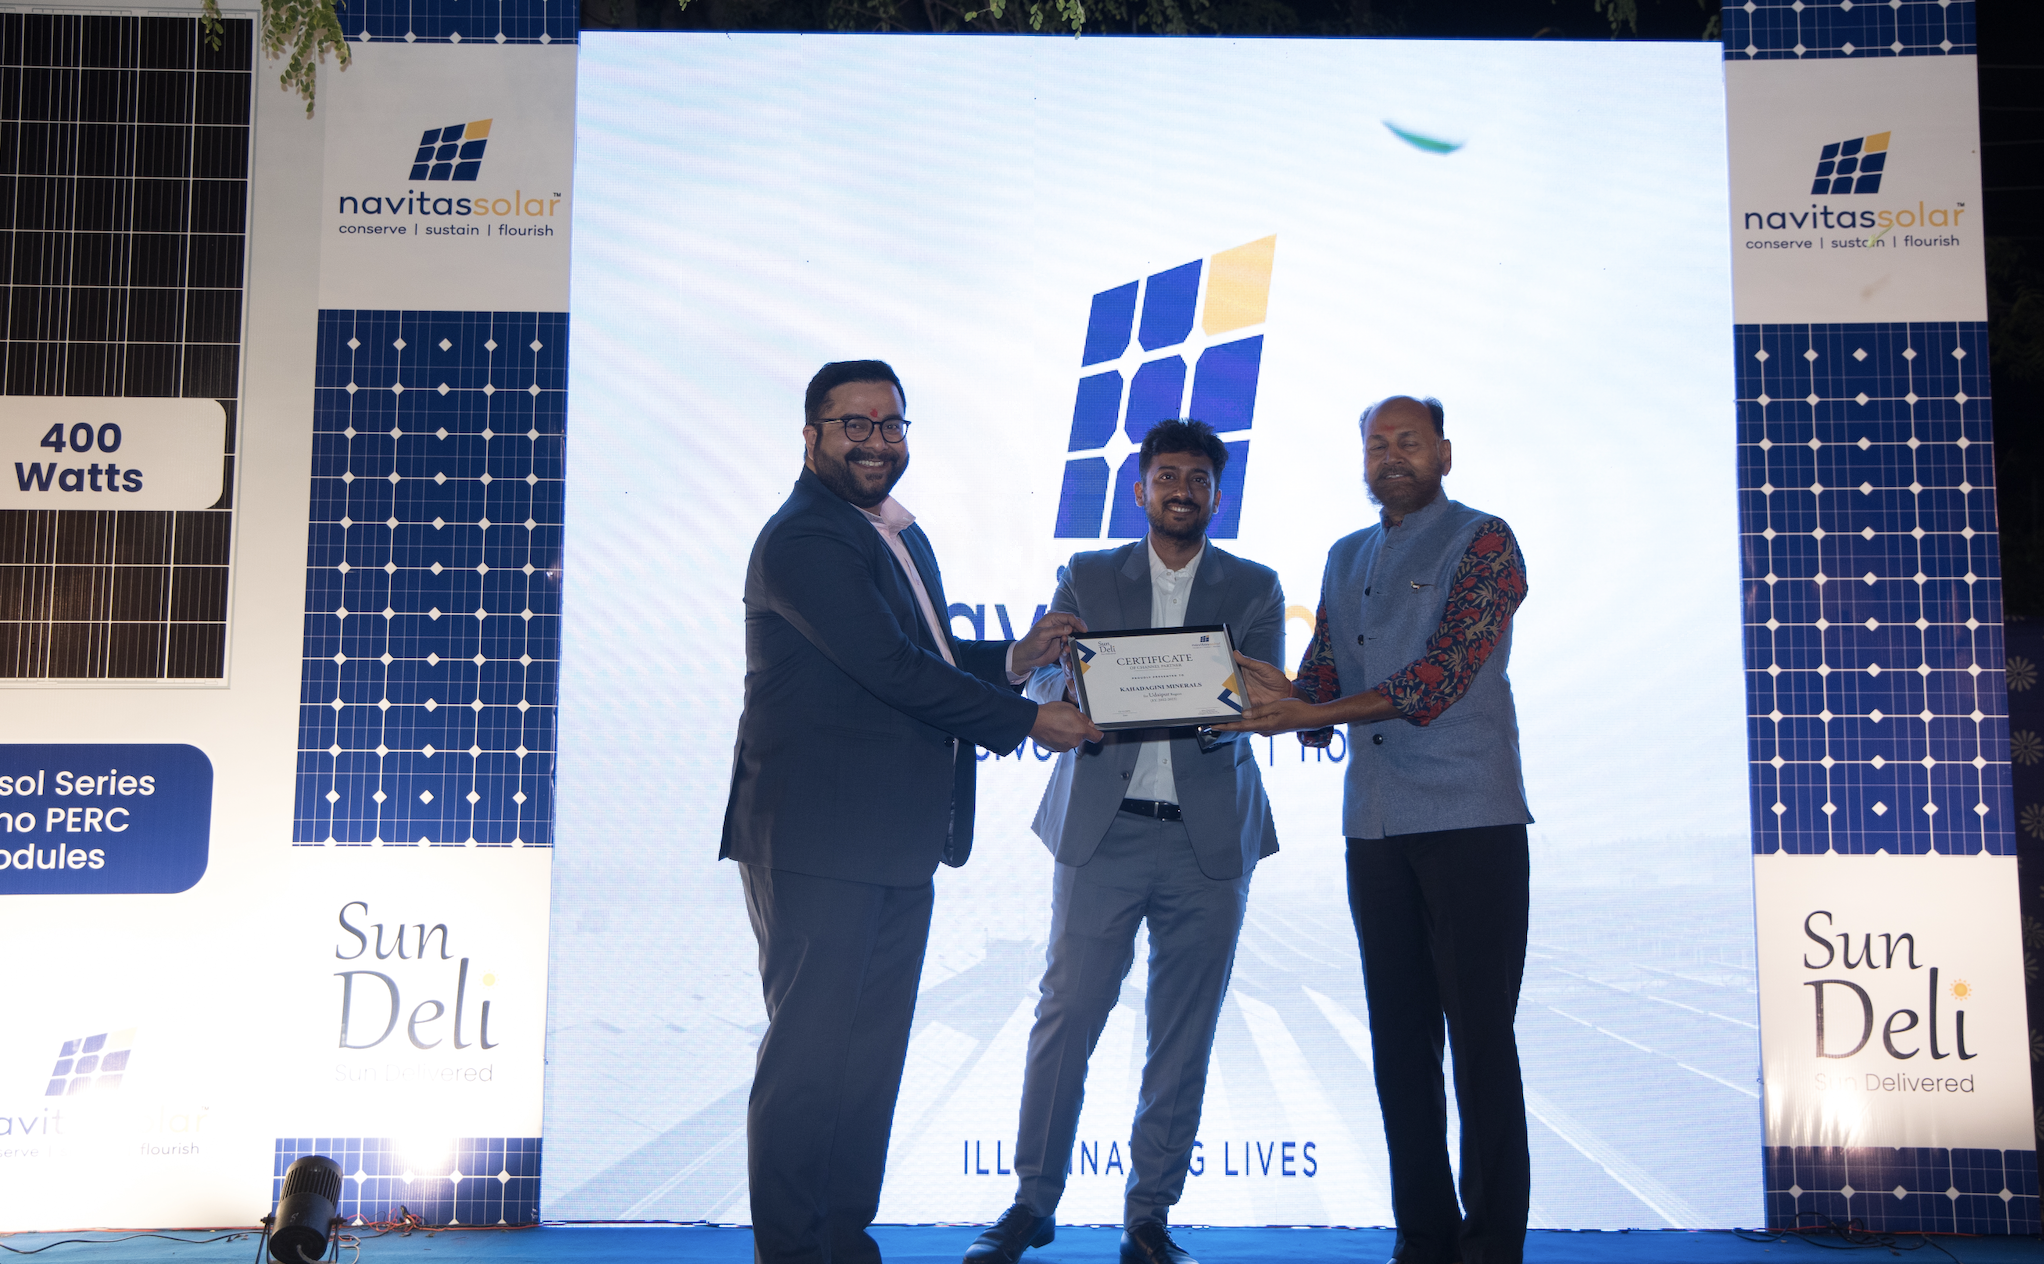 SUNDELI, a young B2B brand has tied up with NAVITAS Solar as their sole distributor in Rajasthan 